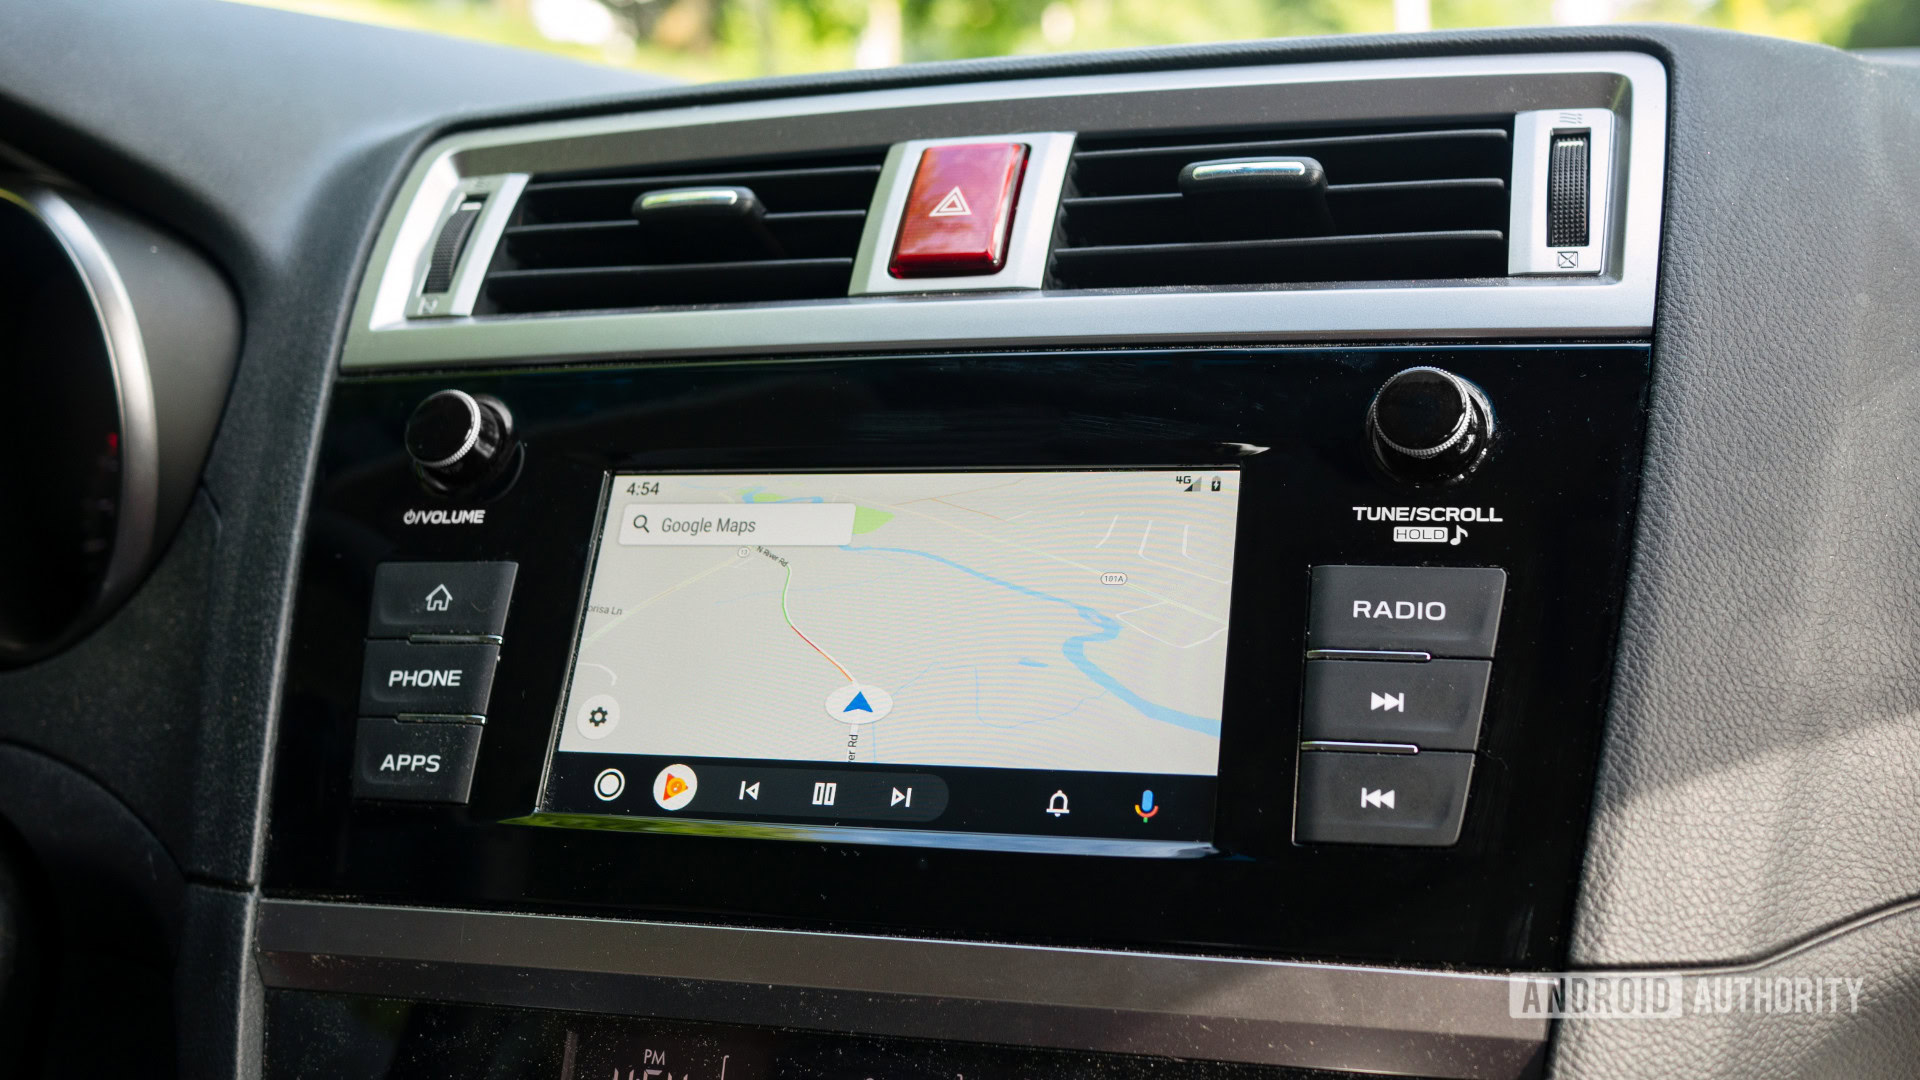 https://www.androidauthority.com/wp-content/uploads/2022/04/Android-Auto-Redesign-Google-Maps-1080.jpg